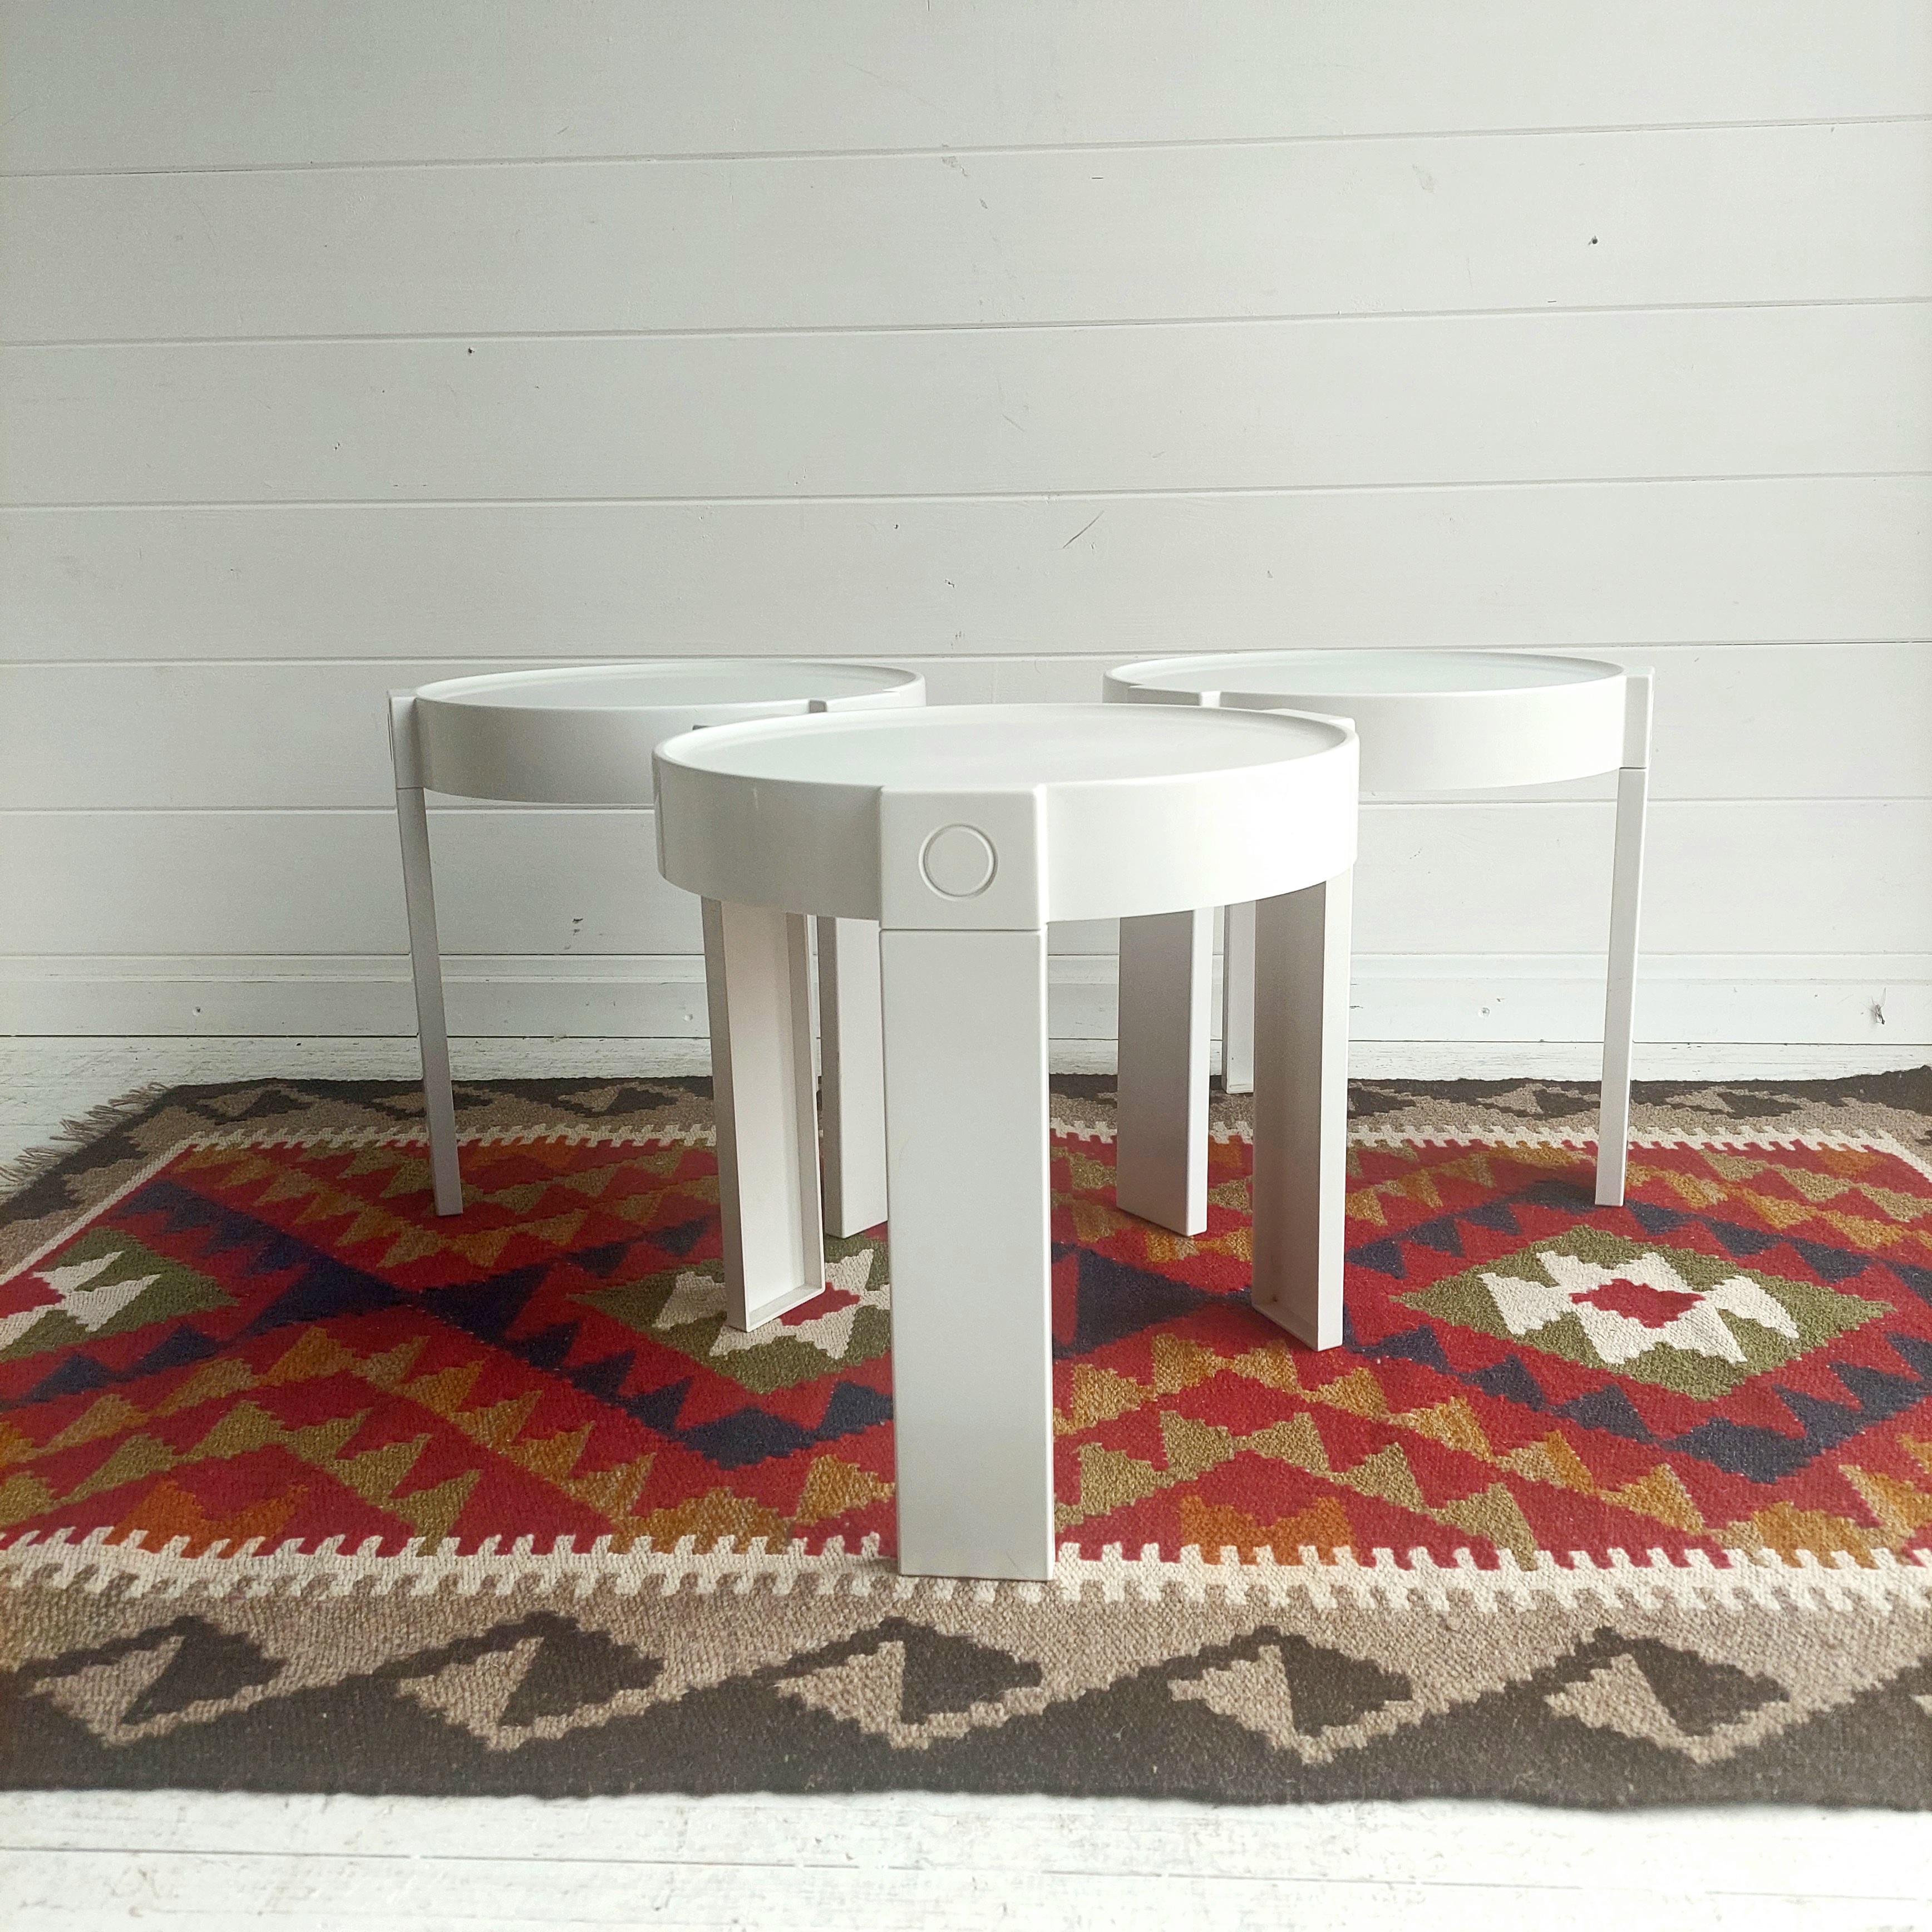 Set of 3 1960's /70's retro tables in white plastic, 
Very reminiscent of Crayonne and Kartell. 
Small stackable nesting tables from the 70s. Engraved 